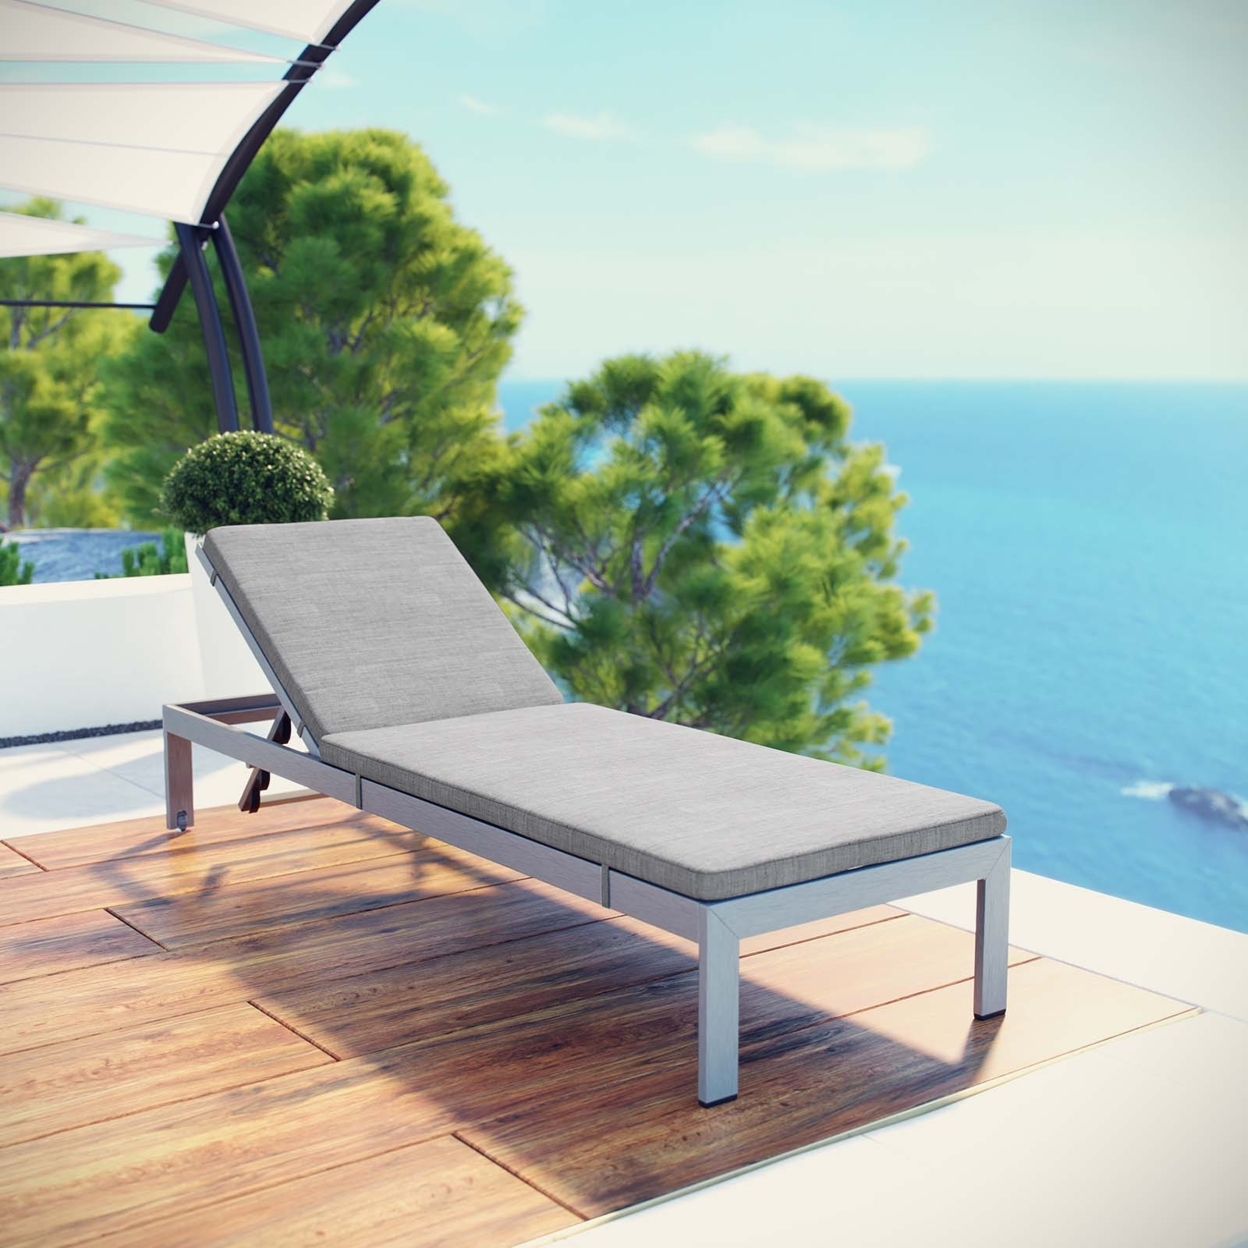 Shore Outdoor Patio Aluminum Chaise with Cushions Silver gray - image 5 of 5